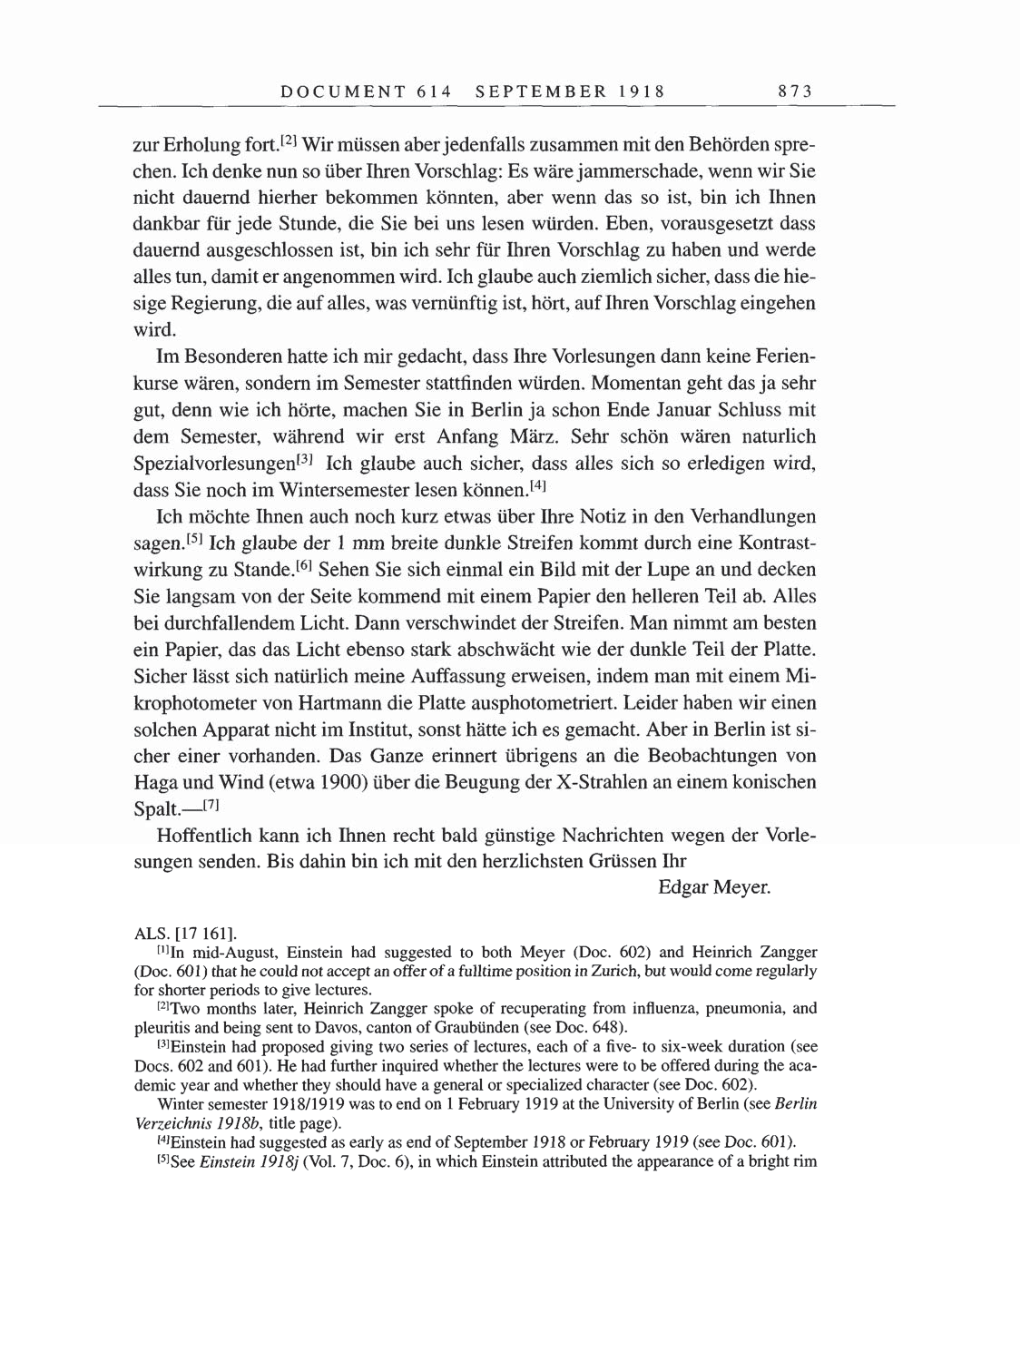 Volume 8, Part B: The Berlin Years: Correspondence 1918 page 873